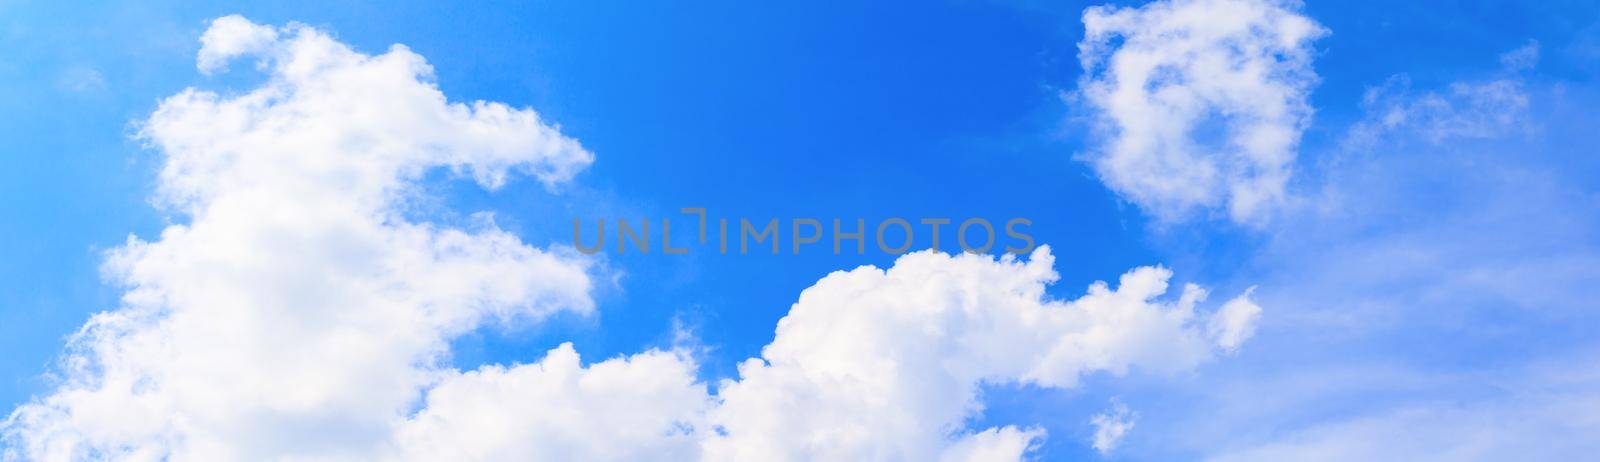 panoramic sky and cloud summer times beautiful background by pramot